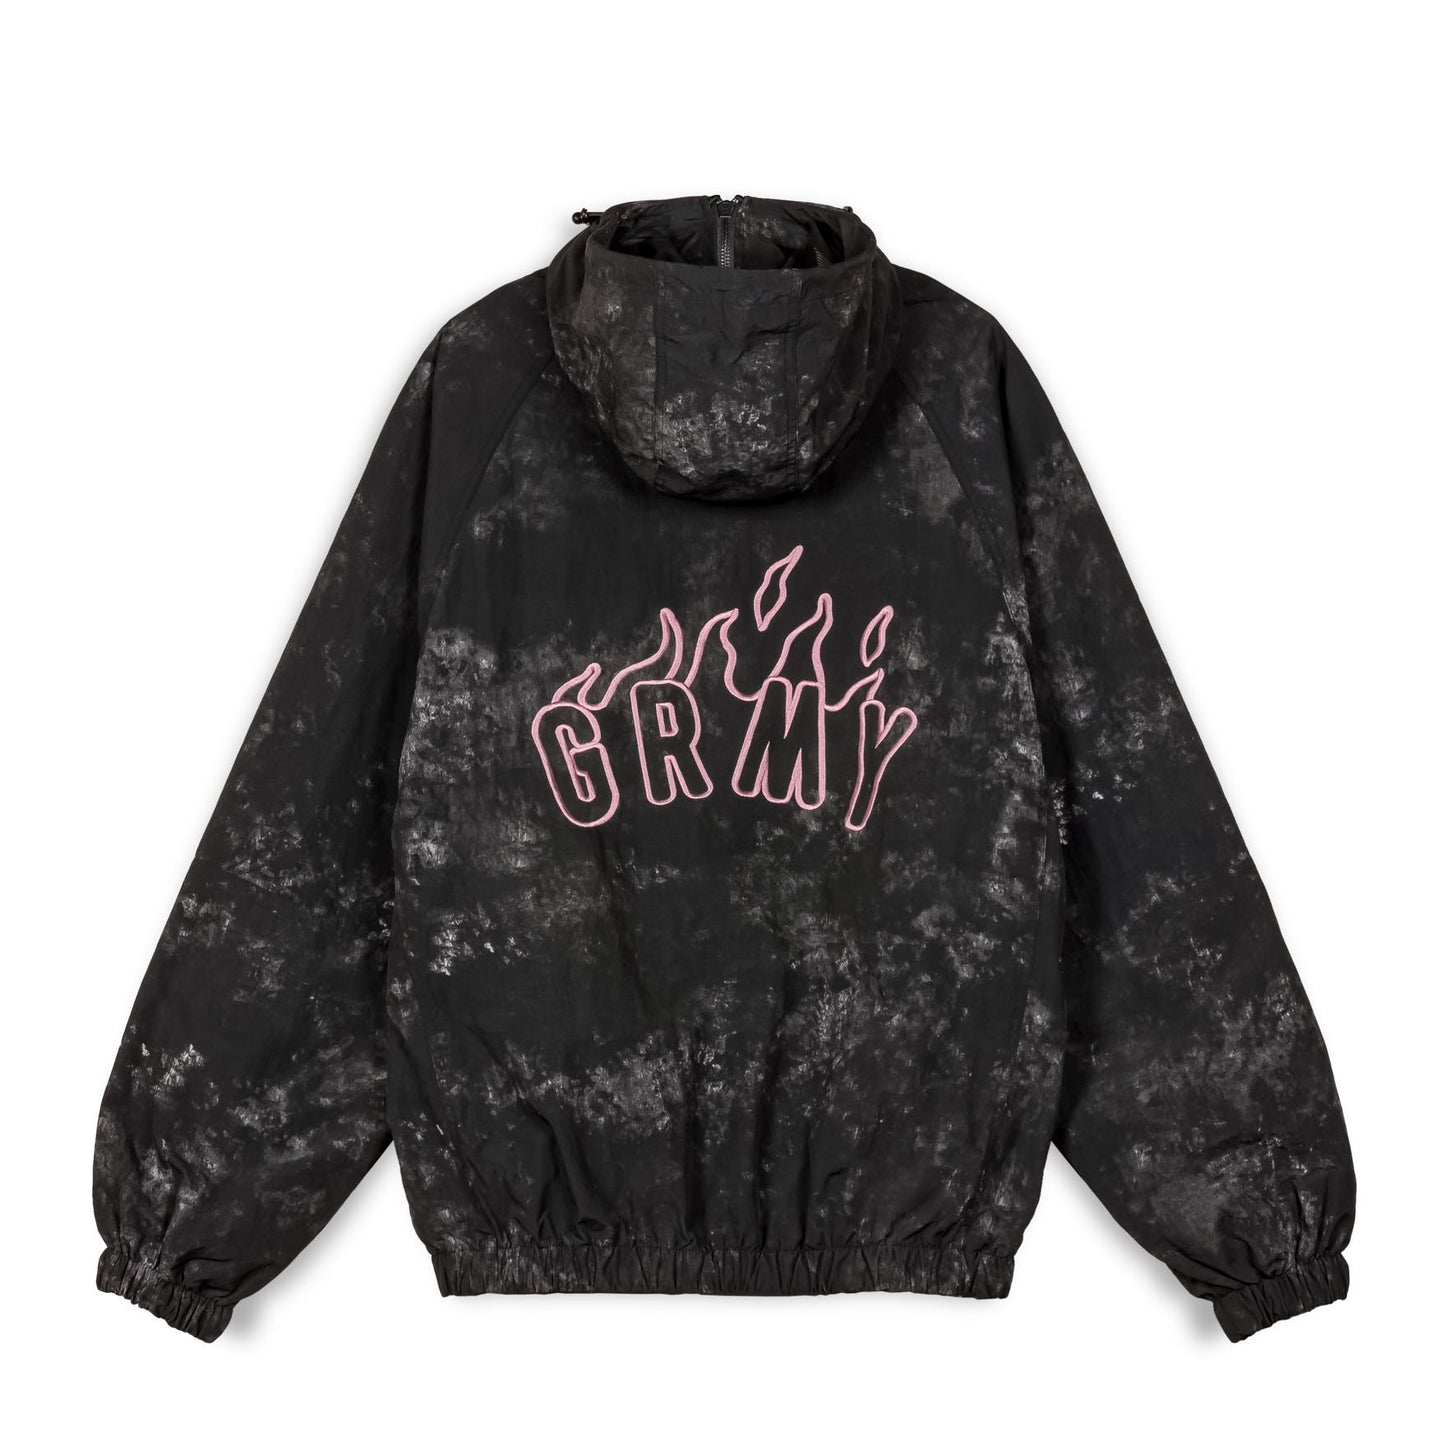 MELTED STONE TIE AND DYE VINTAGE TRACK JACKET BLACK